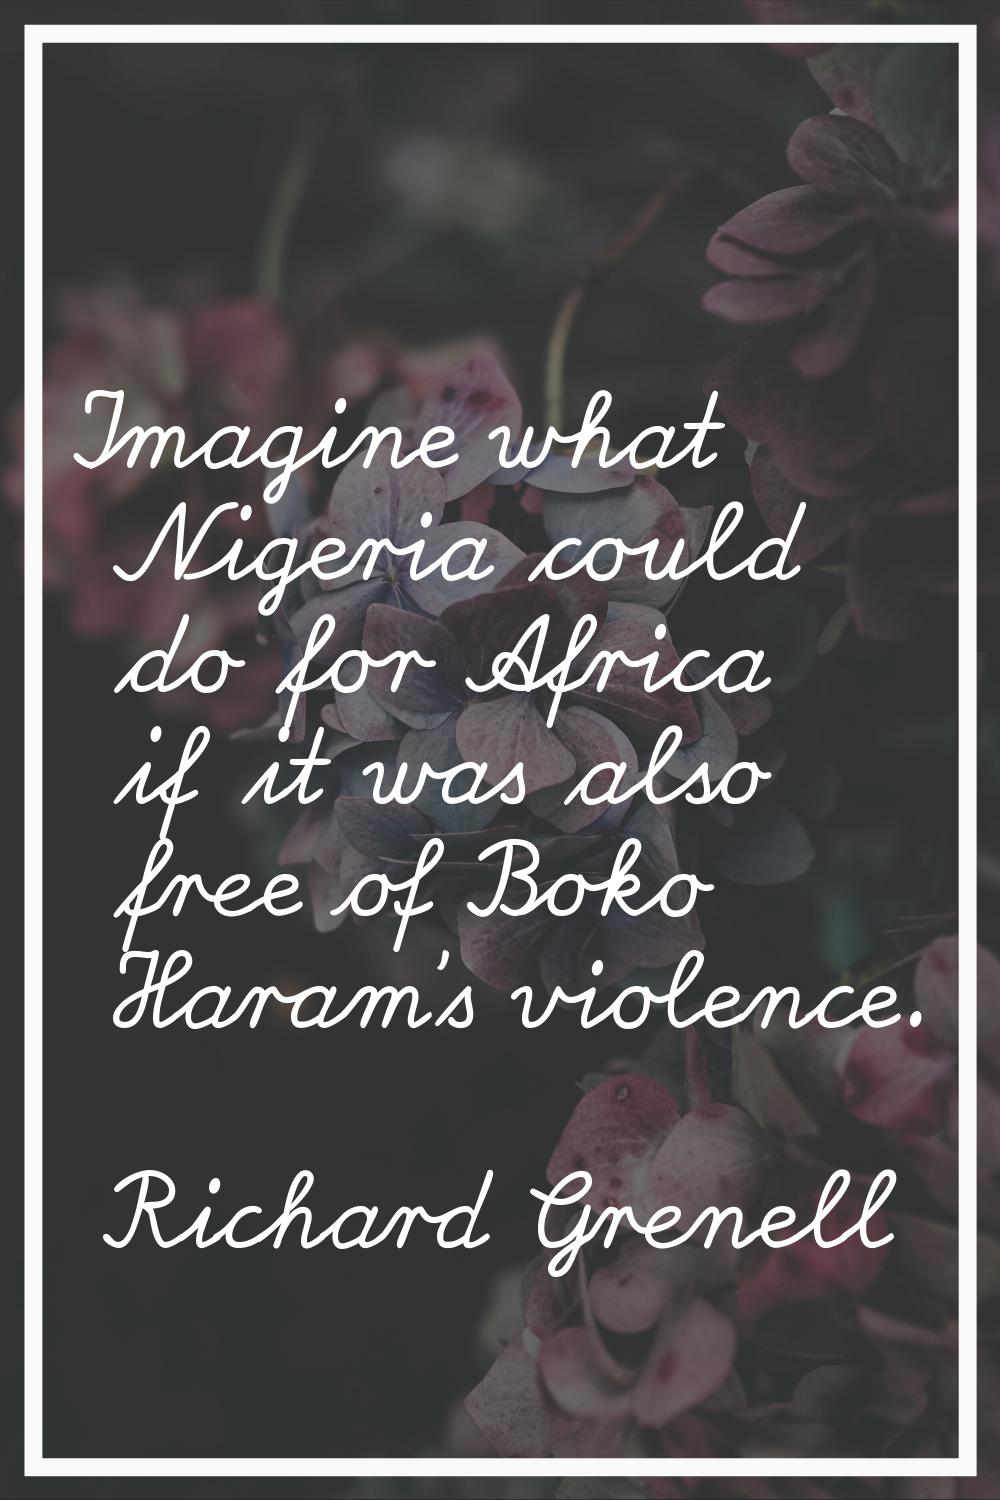 Imagine what Nigeria could do for Africa if it was also free of Boko Haram's violence.